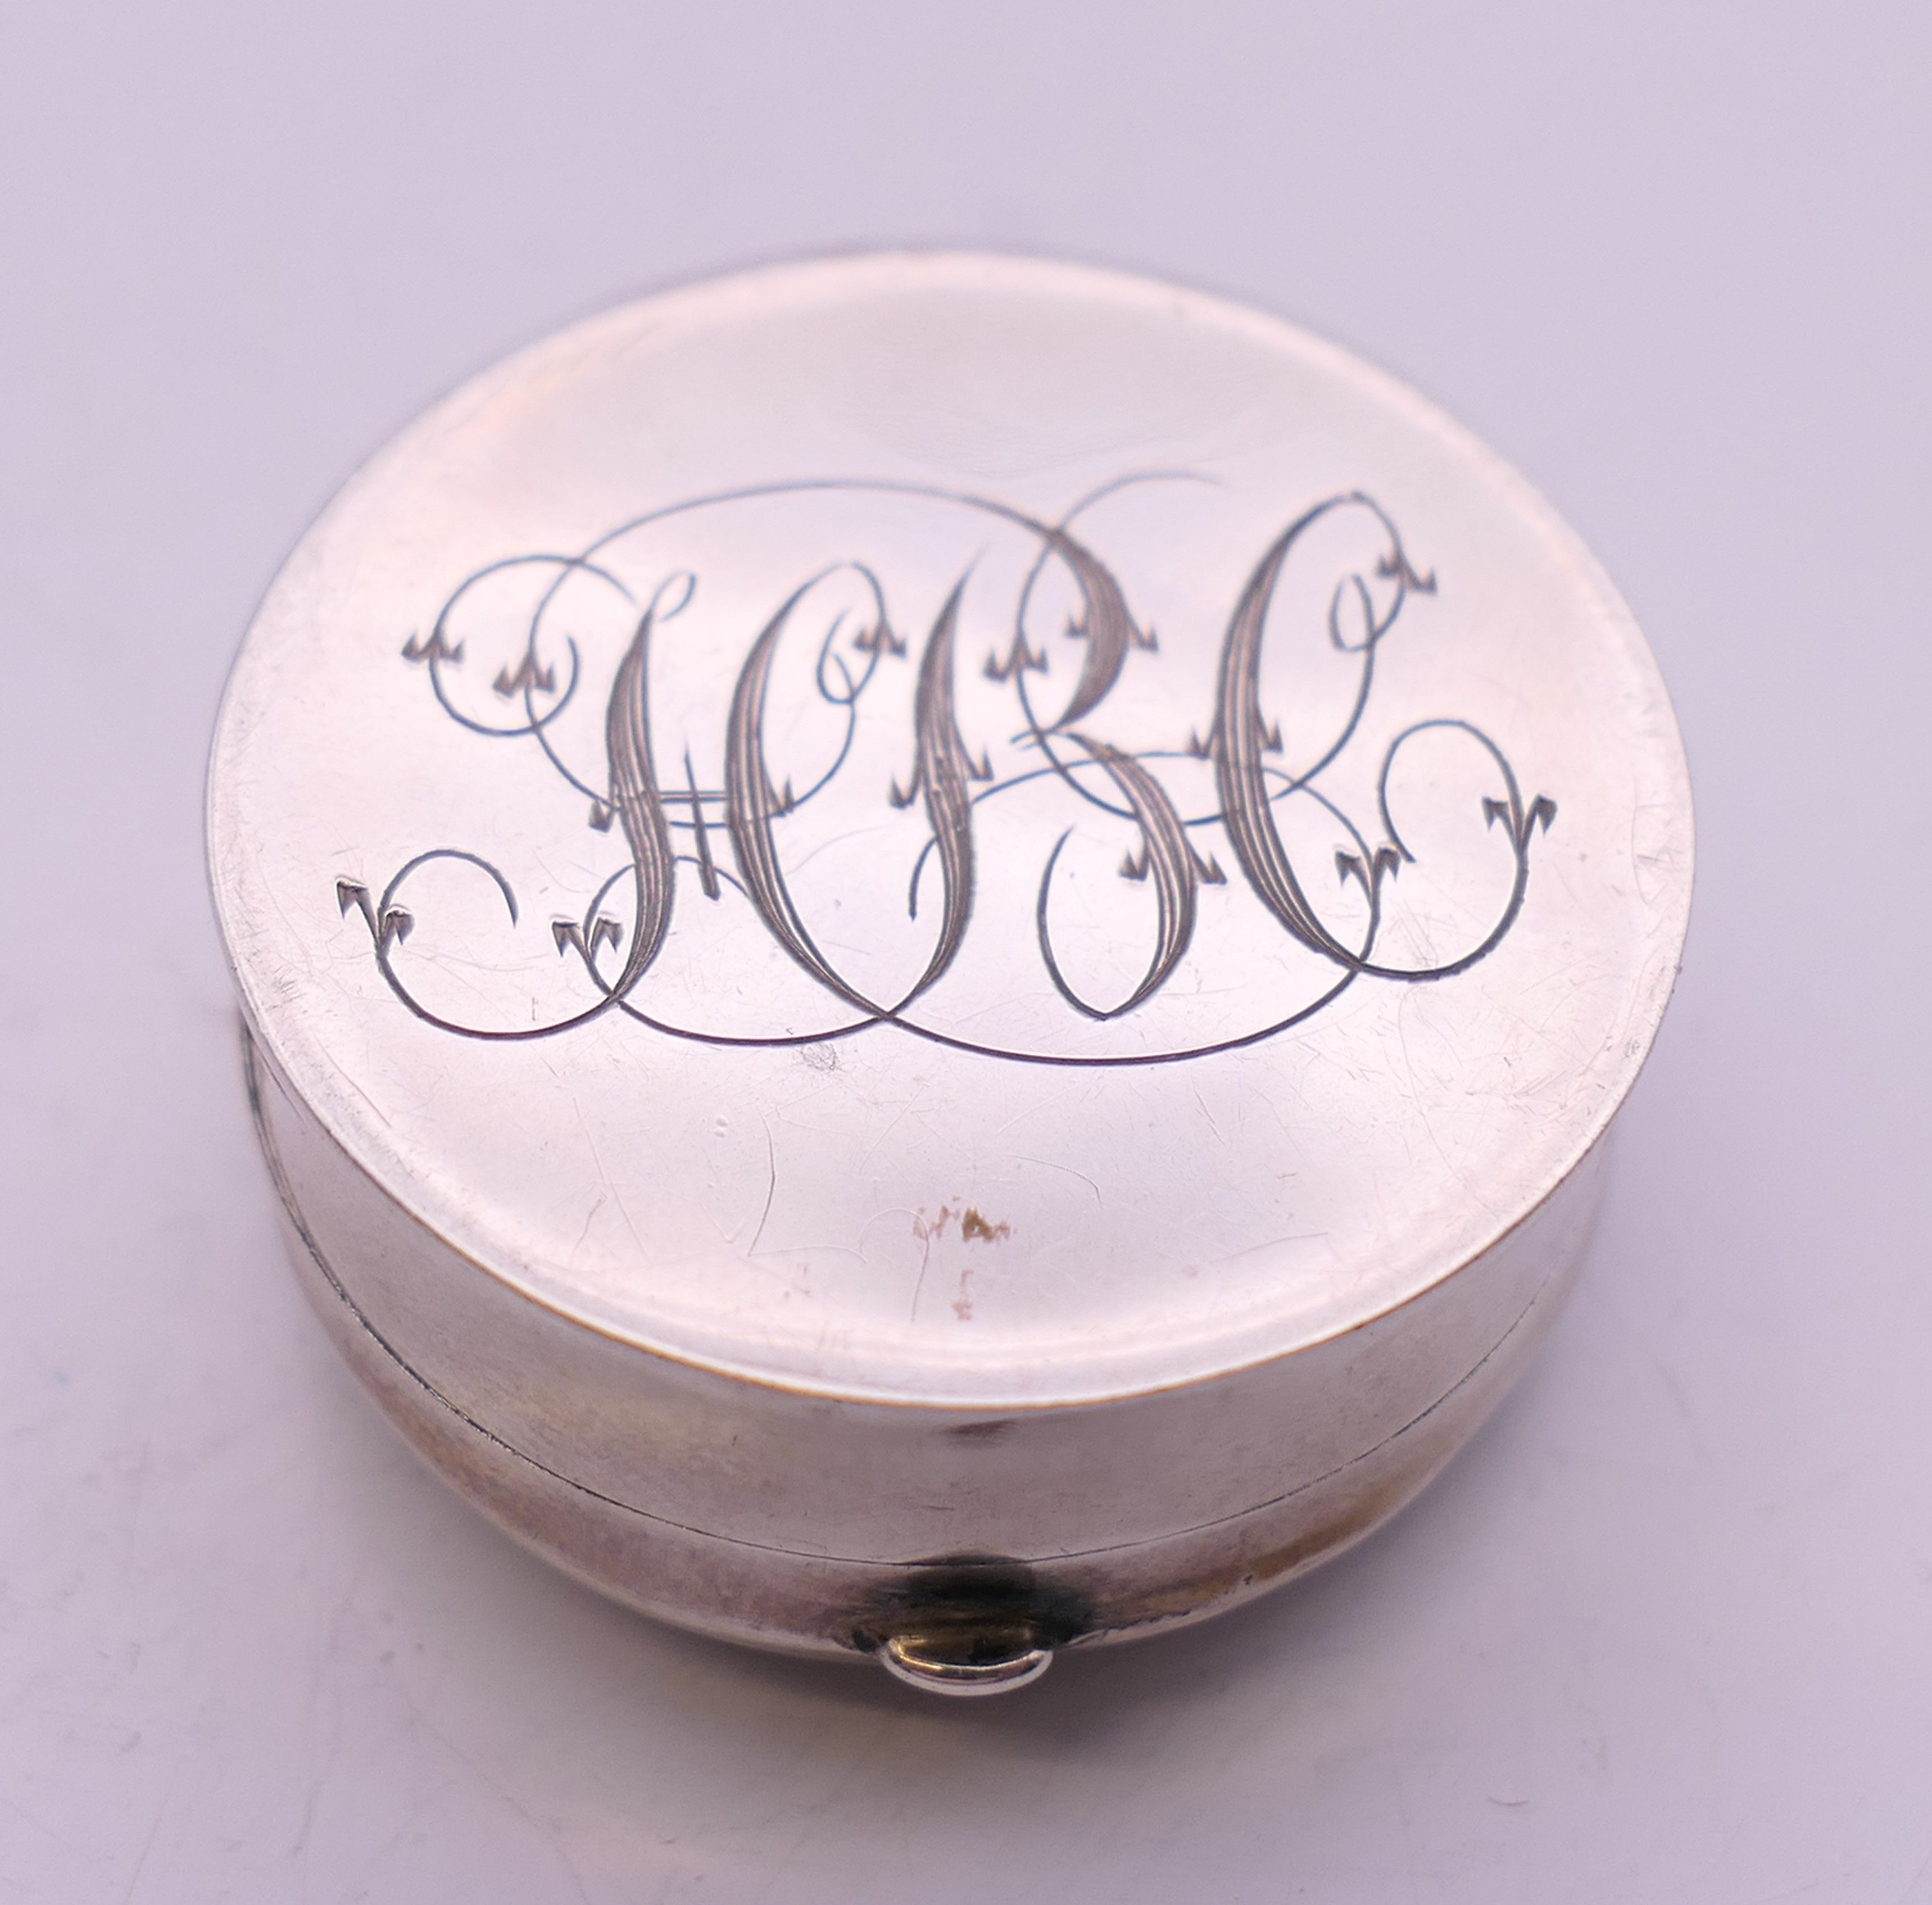 A small Edwardian silver round pill box, Birmingham 1900, top and bottom engraved with initials. - Image 4 of 7